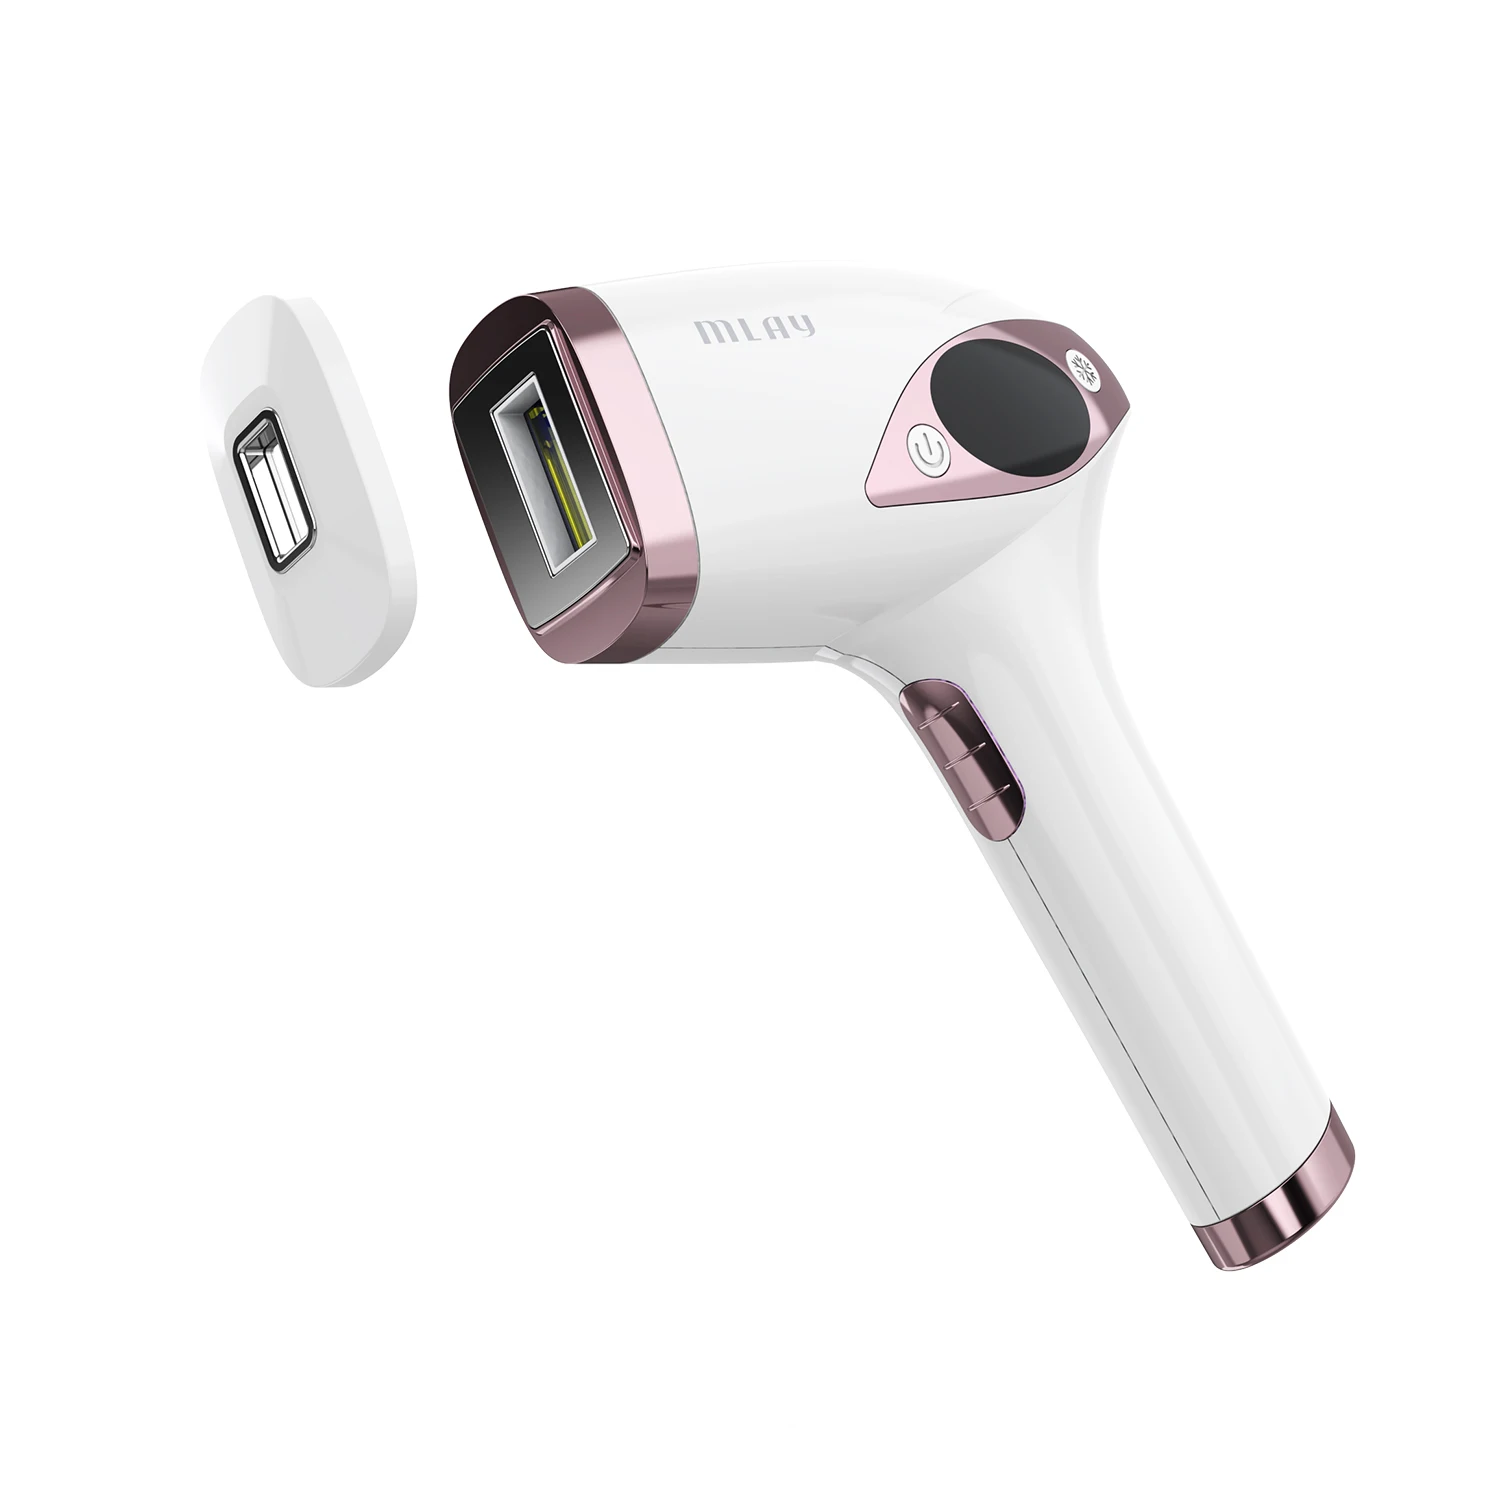 New Arrival Mlay T4 Portable IPL Epilator for Home Use Permanent Hair Removal with UK US Plug